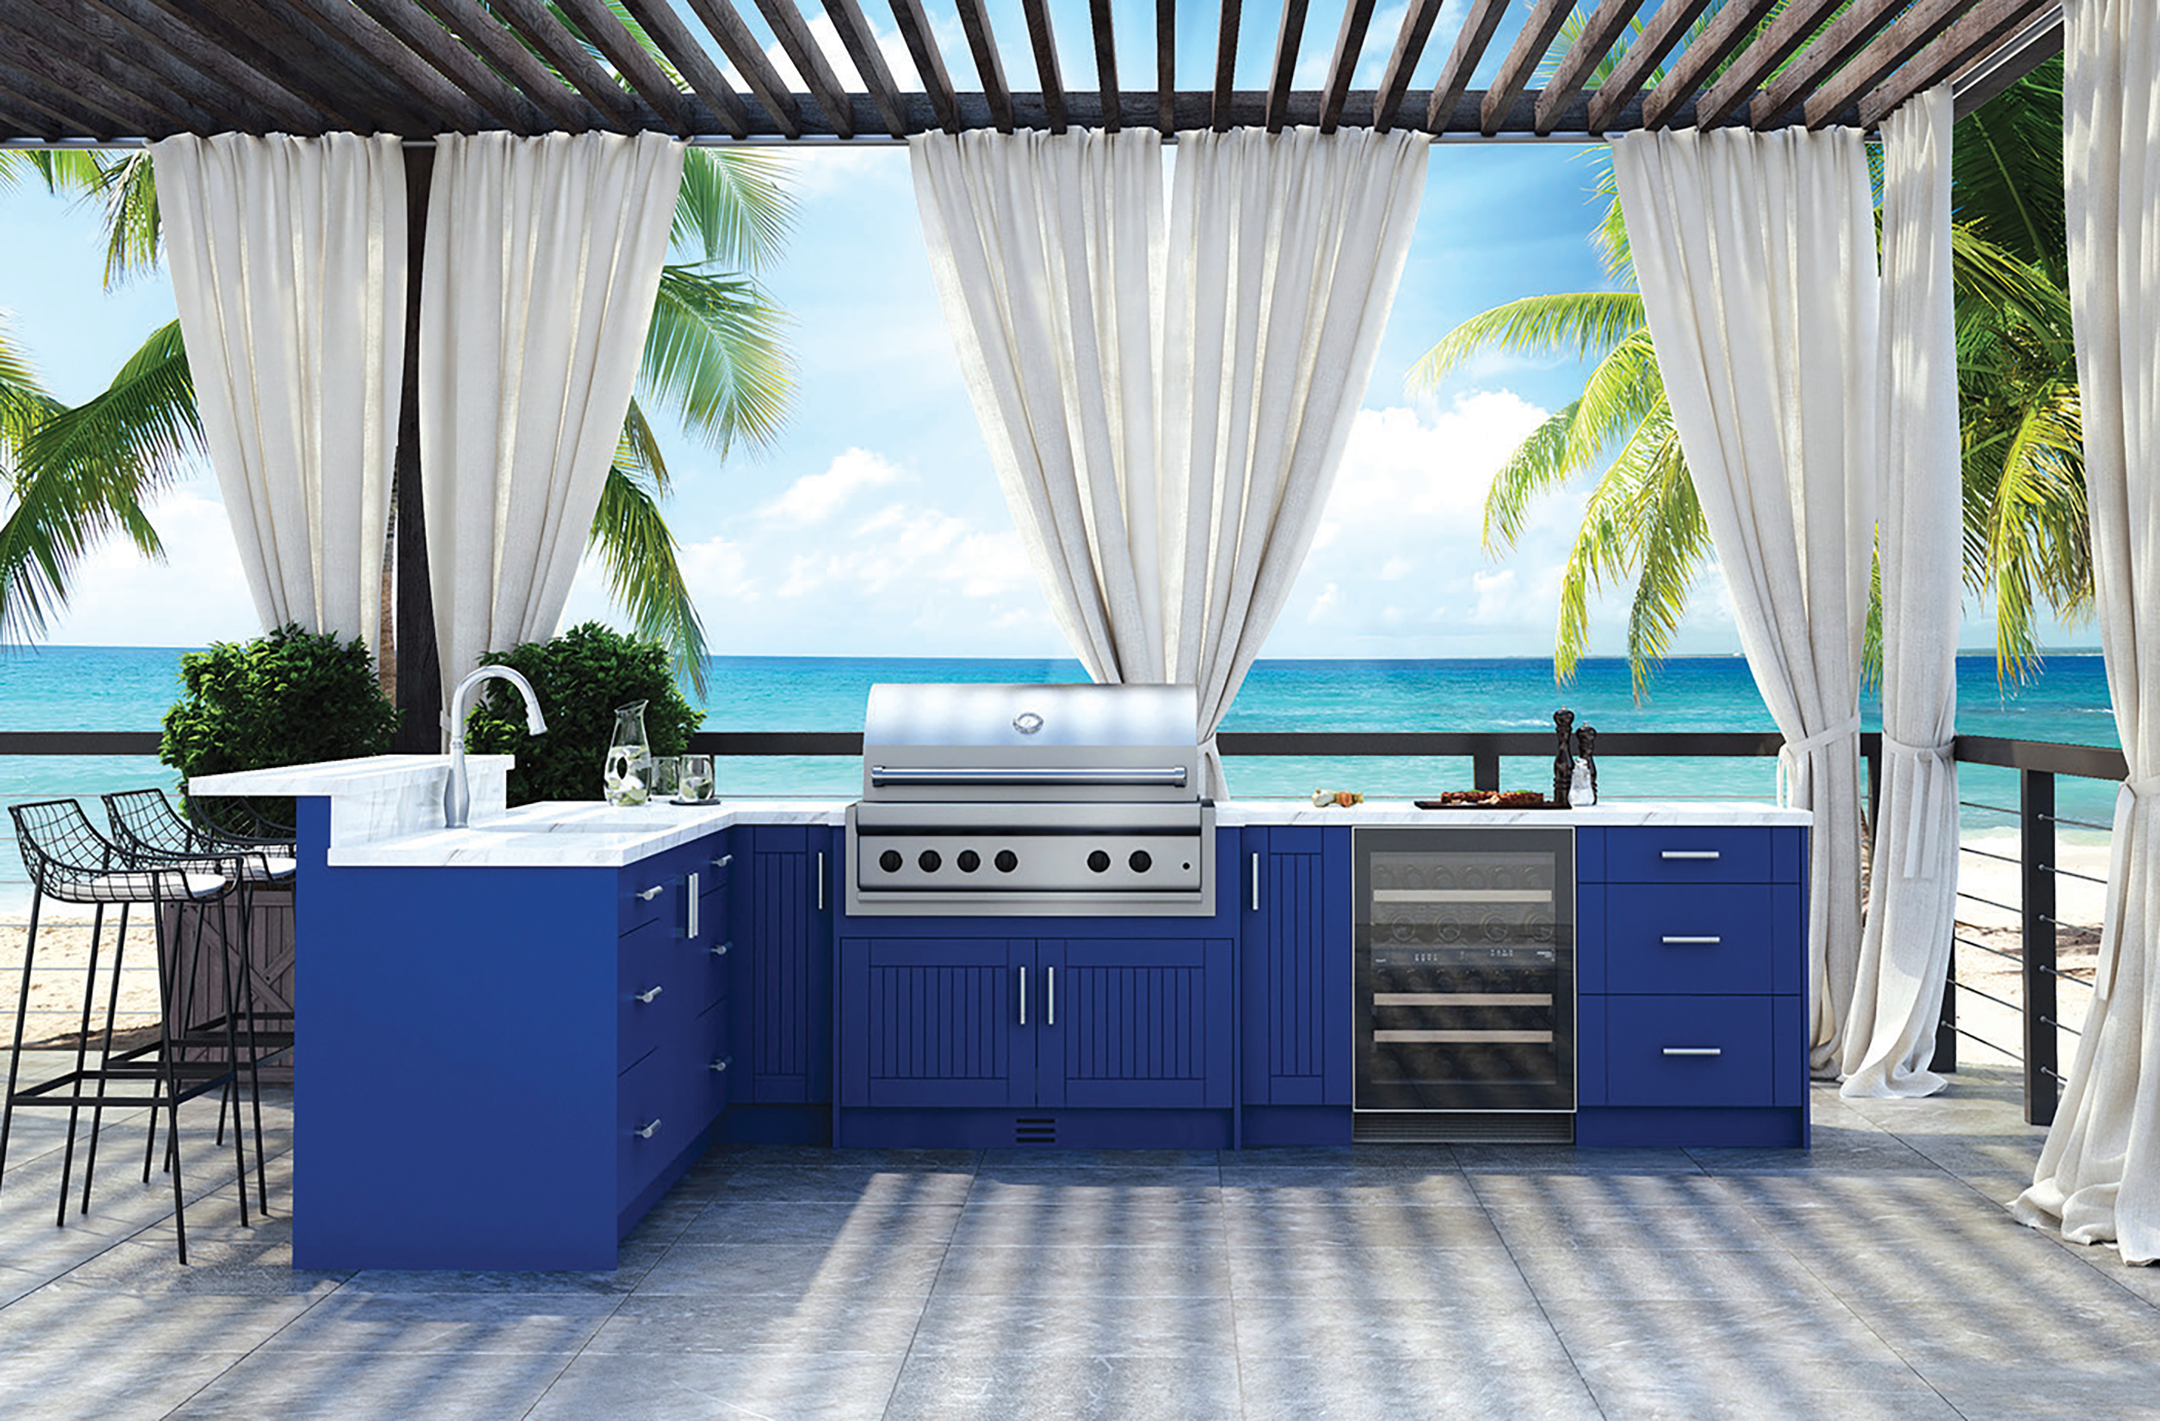  Brighten up your outdoor kitchen with  Weatherstrong  cabinets built to withstand the elements in an array of vibrant colours.   www.brandsourcecayman.com   